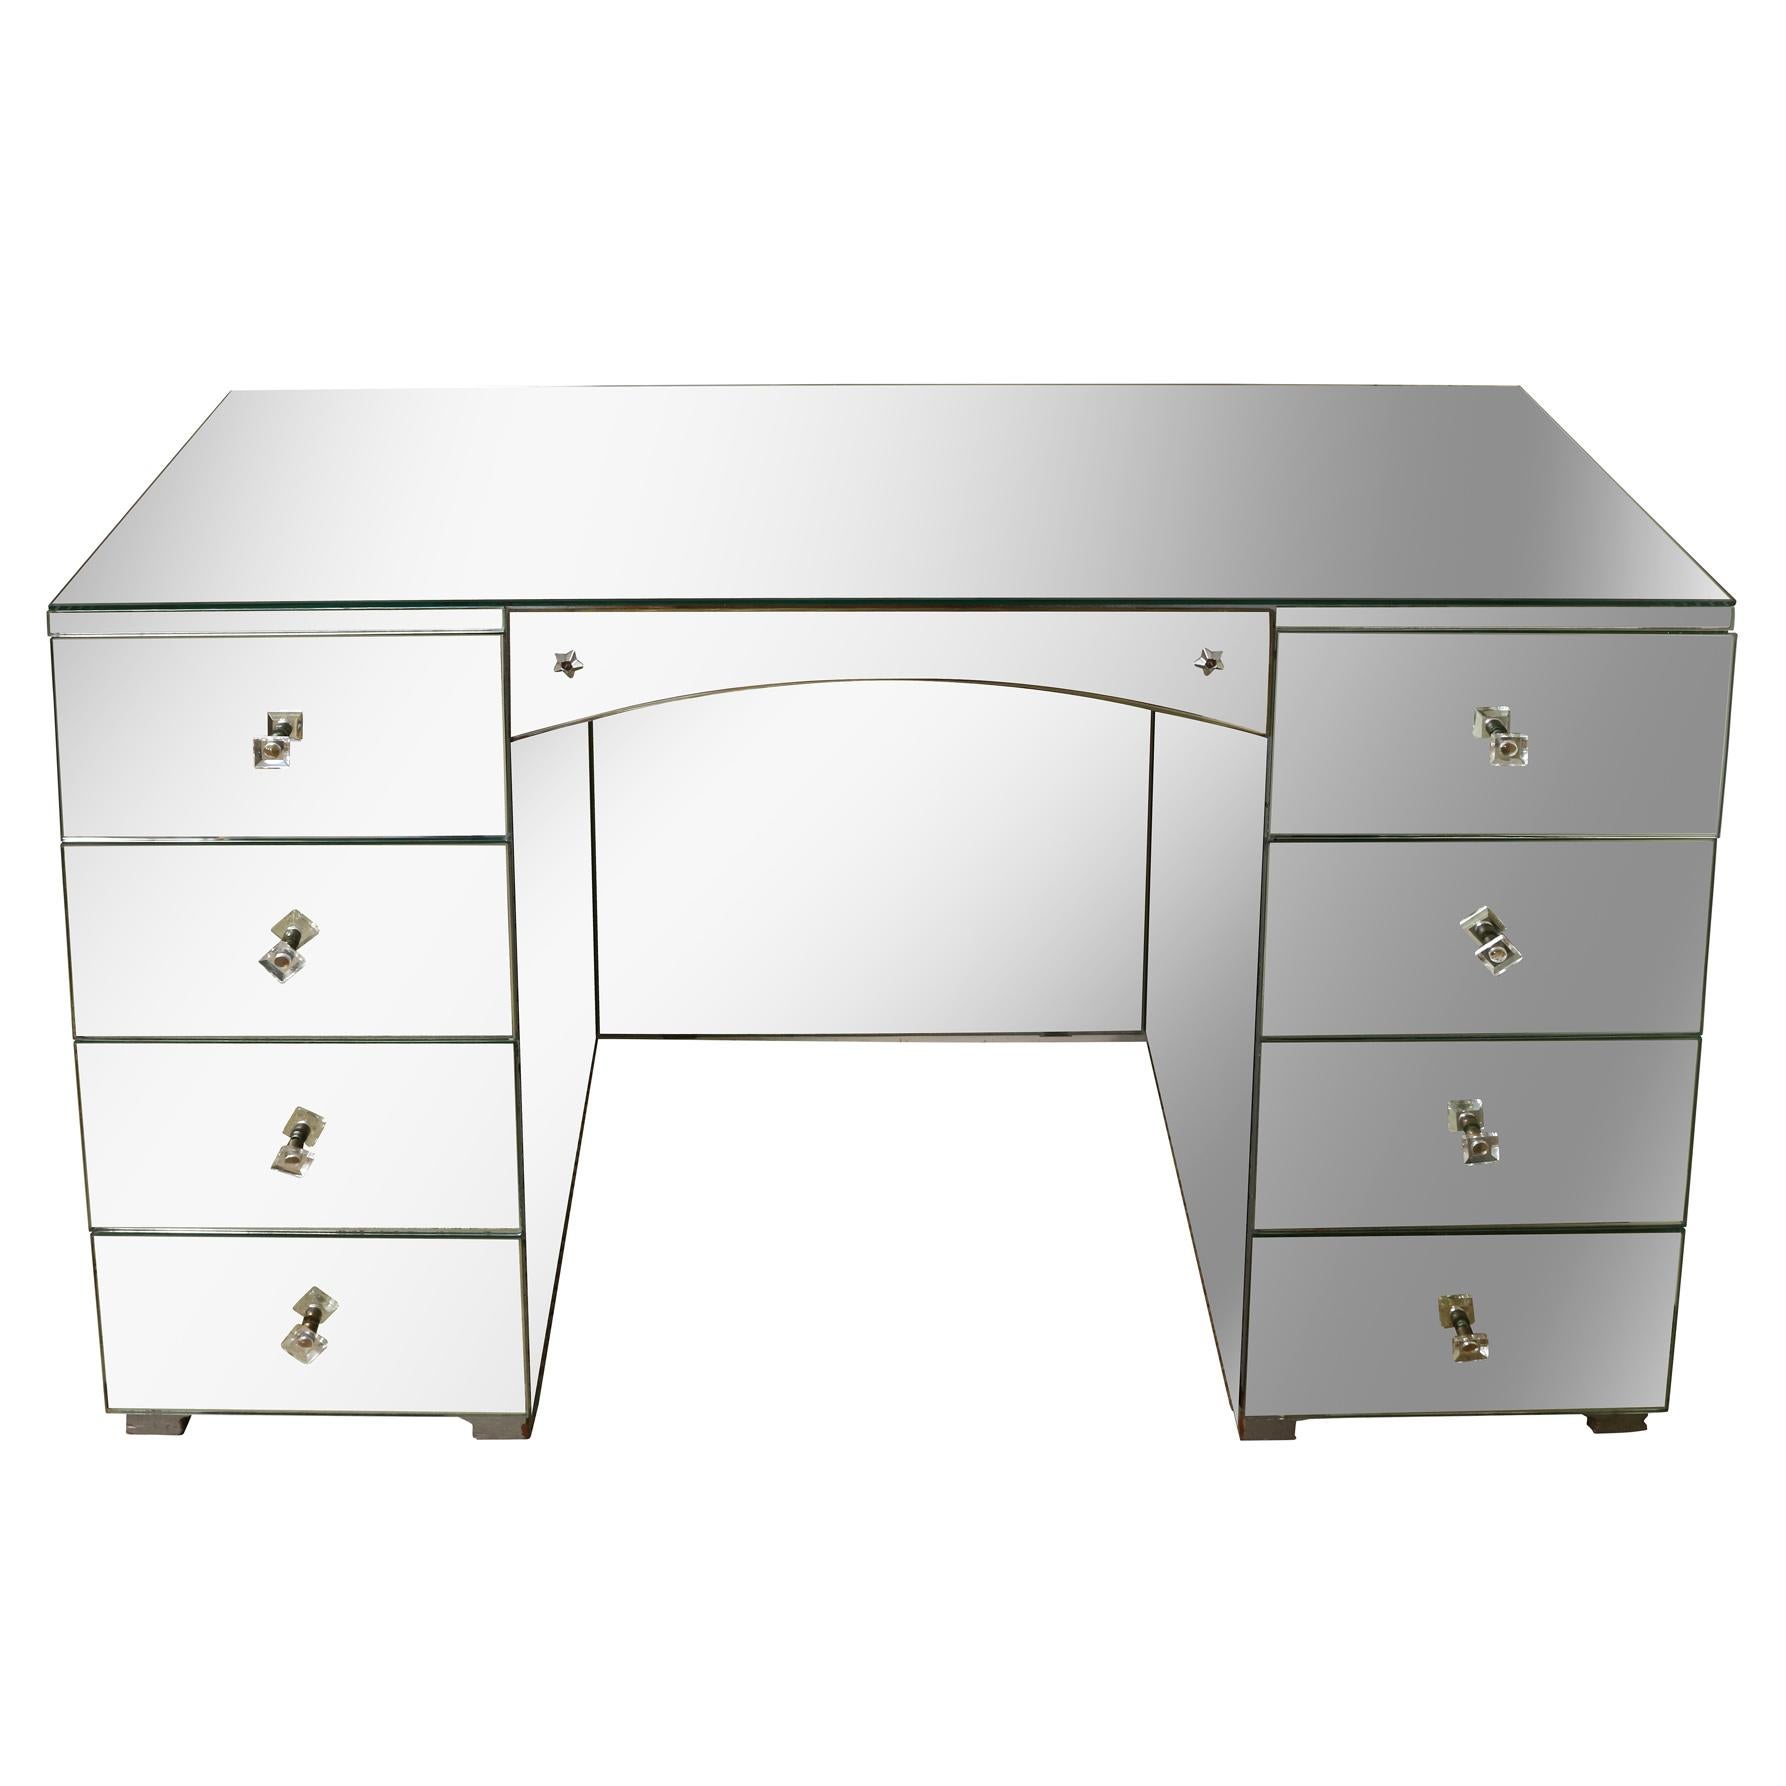 20th Century Vintage Art Deco Mirrored Desk with Eight Drawers, circa 1940